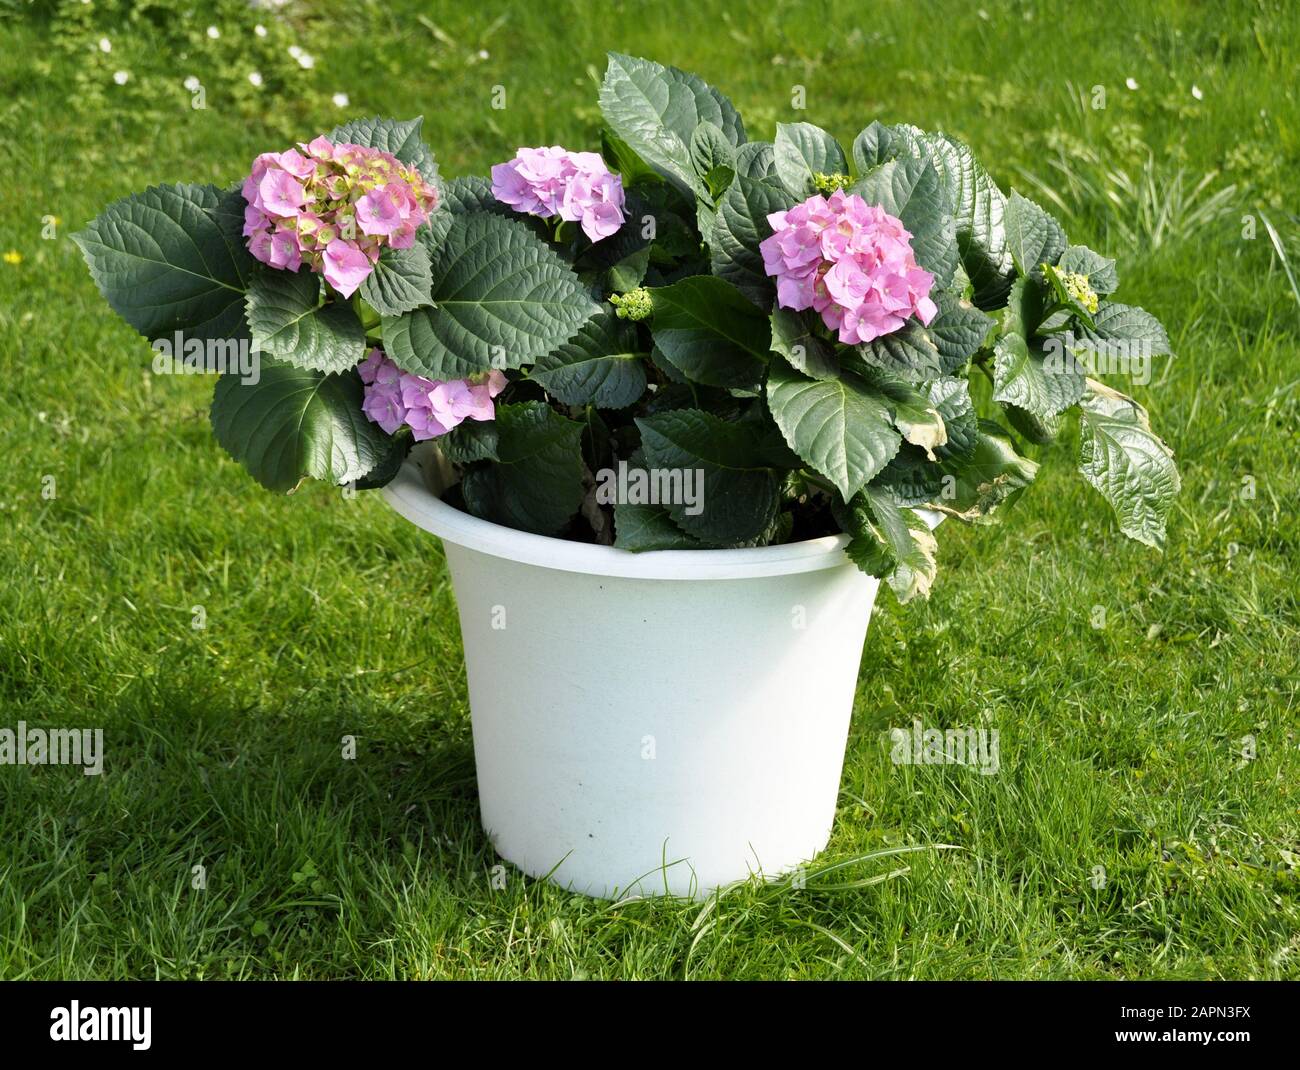 Pink hydrangea in a white pot outdoor Stock Photo